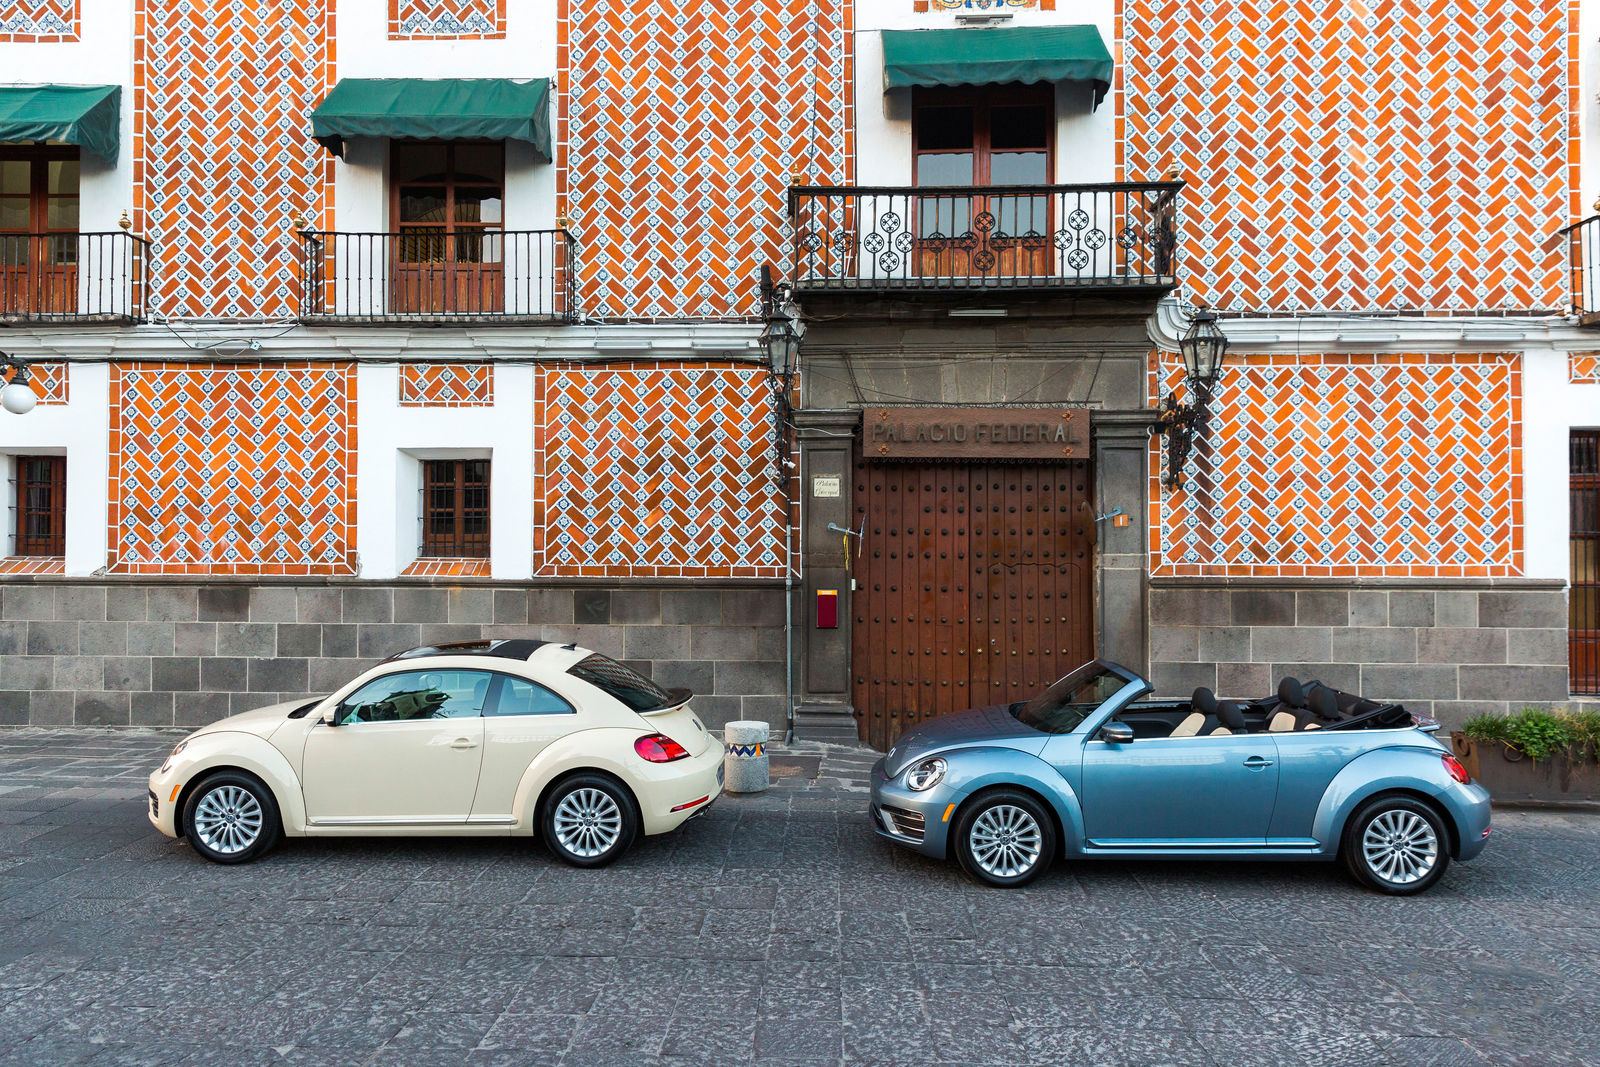 Volkswagen Beetle and Beetle Cabriolet “Final Edition“